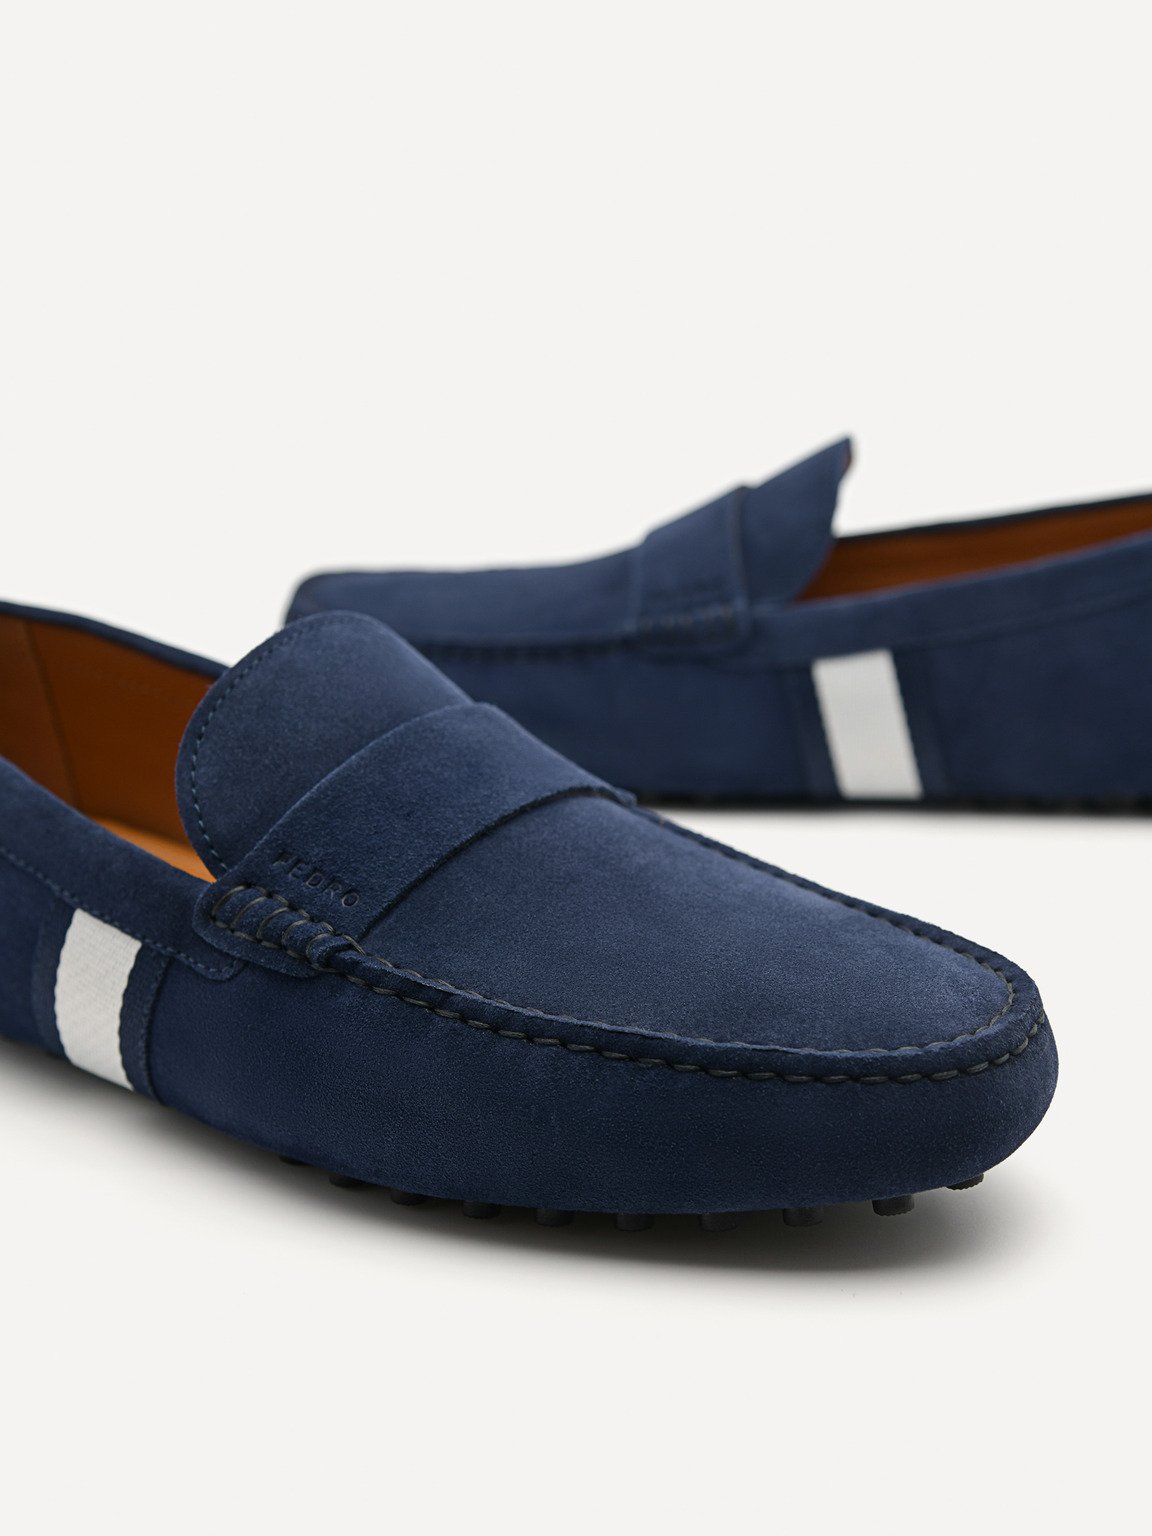 Leather Band Driving Shoes, Navy